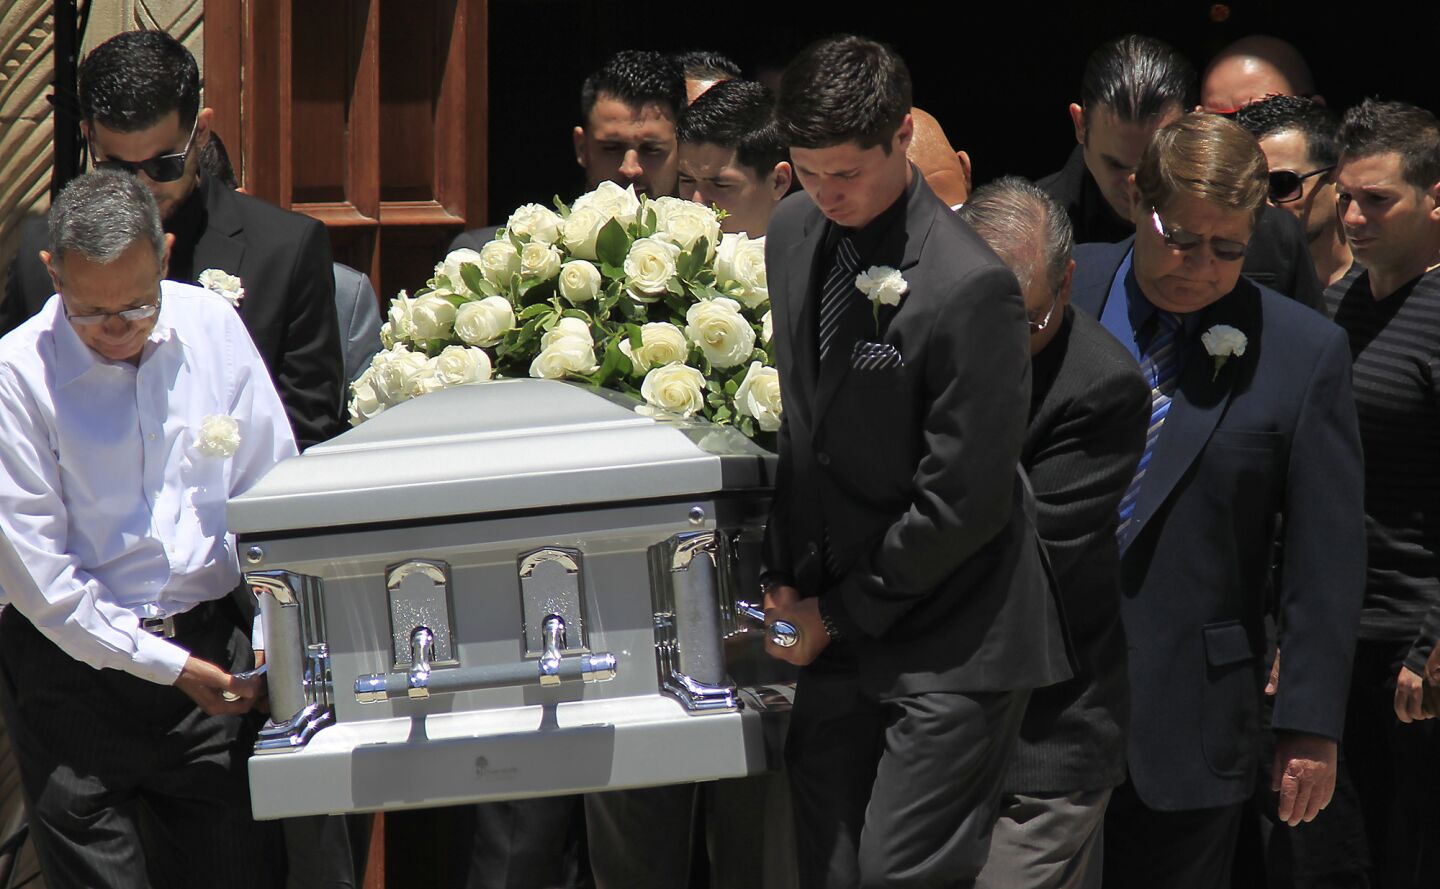 Pallbearers carry the casket of Carlos Franco following a funeral mass for Marcela and Carlos Franco at Saint Monica's Catholic Church.